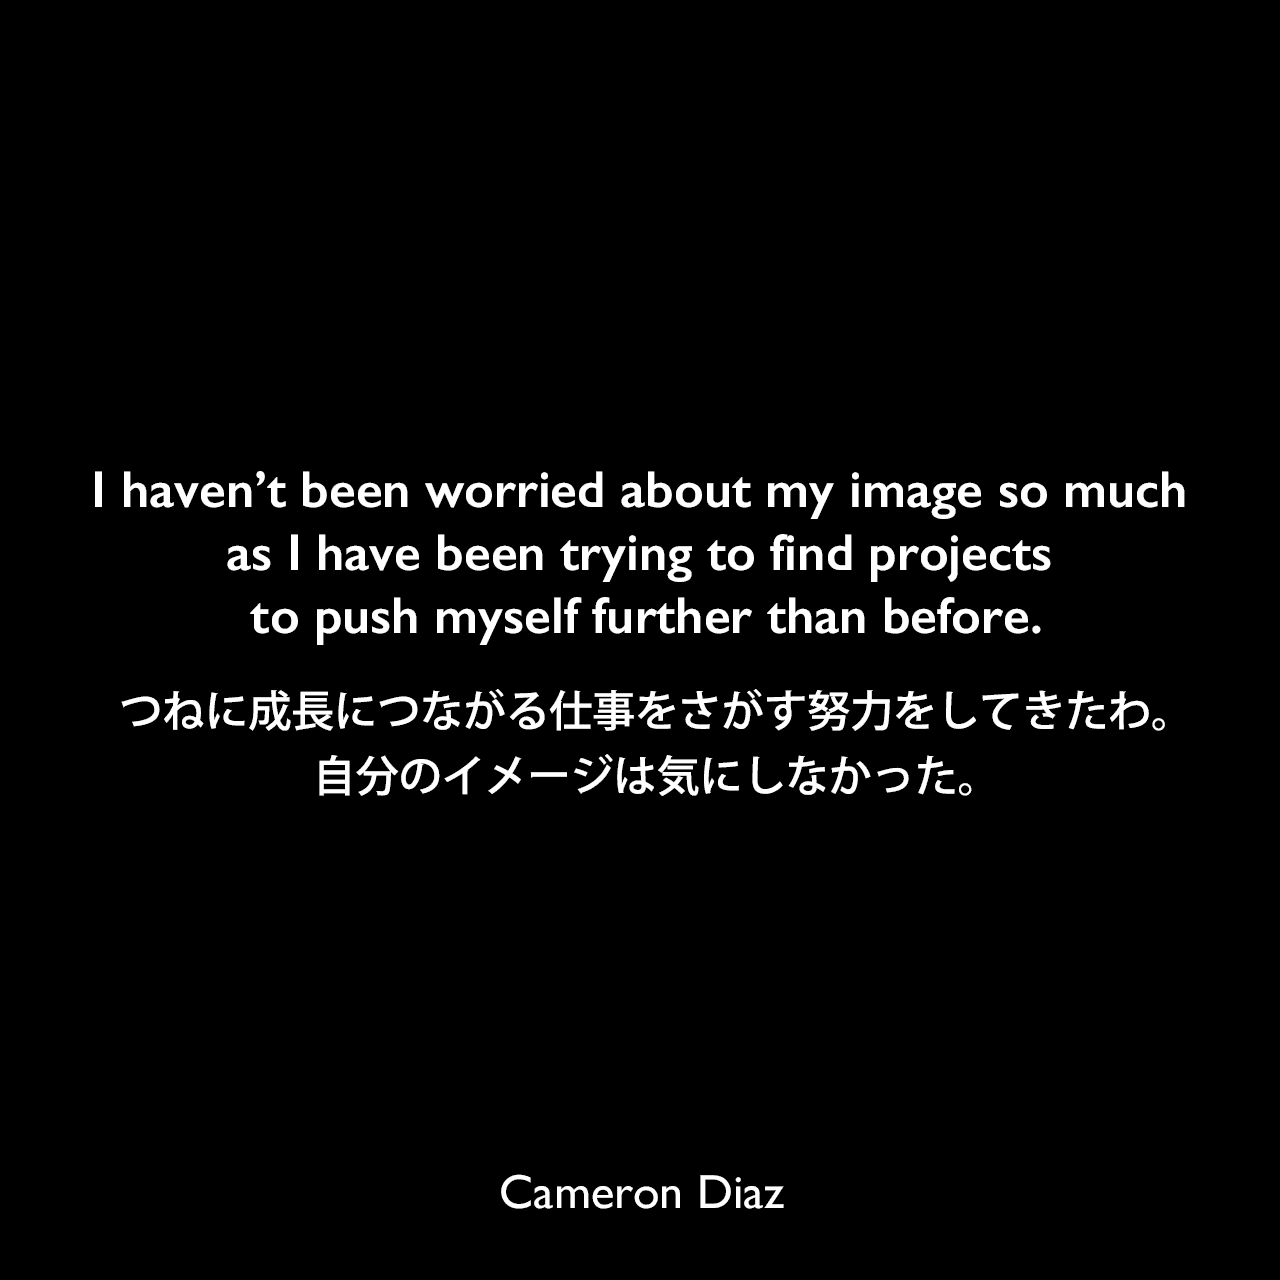 I haven’t been worried about my image so much as I have been trying to find projects to push myself further than before.つねに成長につながる仕事をさがす努力をしてきたわ。自分のイメージは気にしなかった。Cameron Diaz